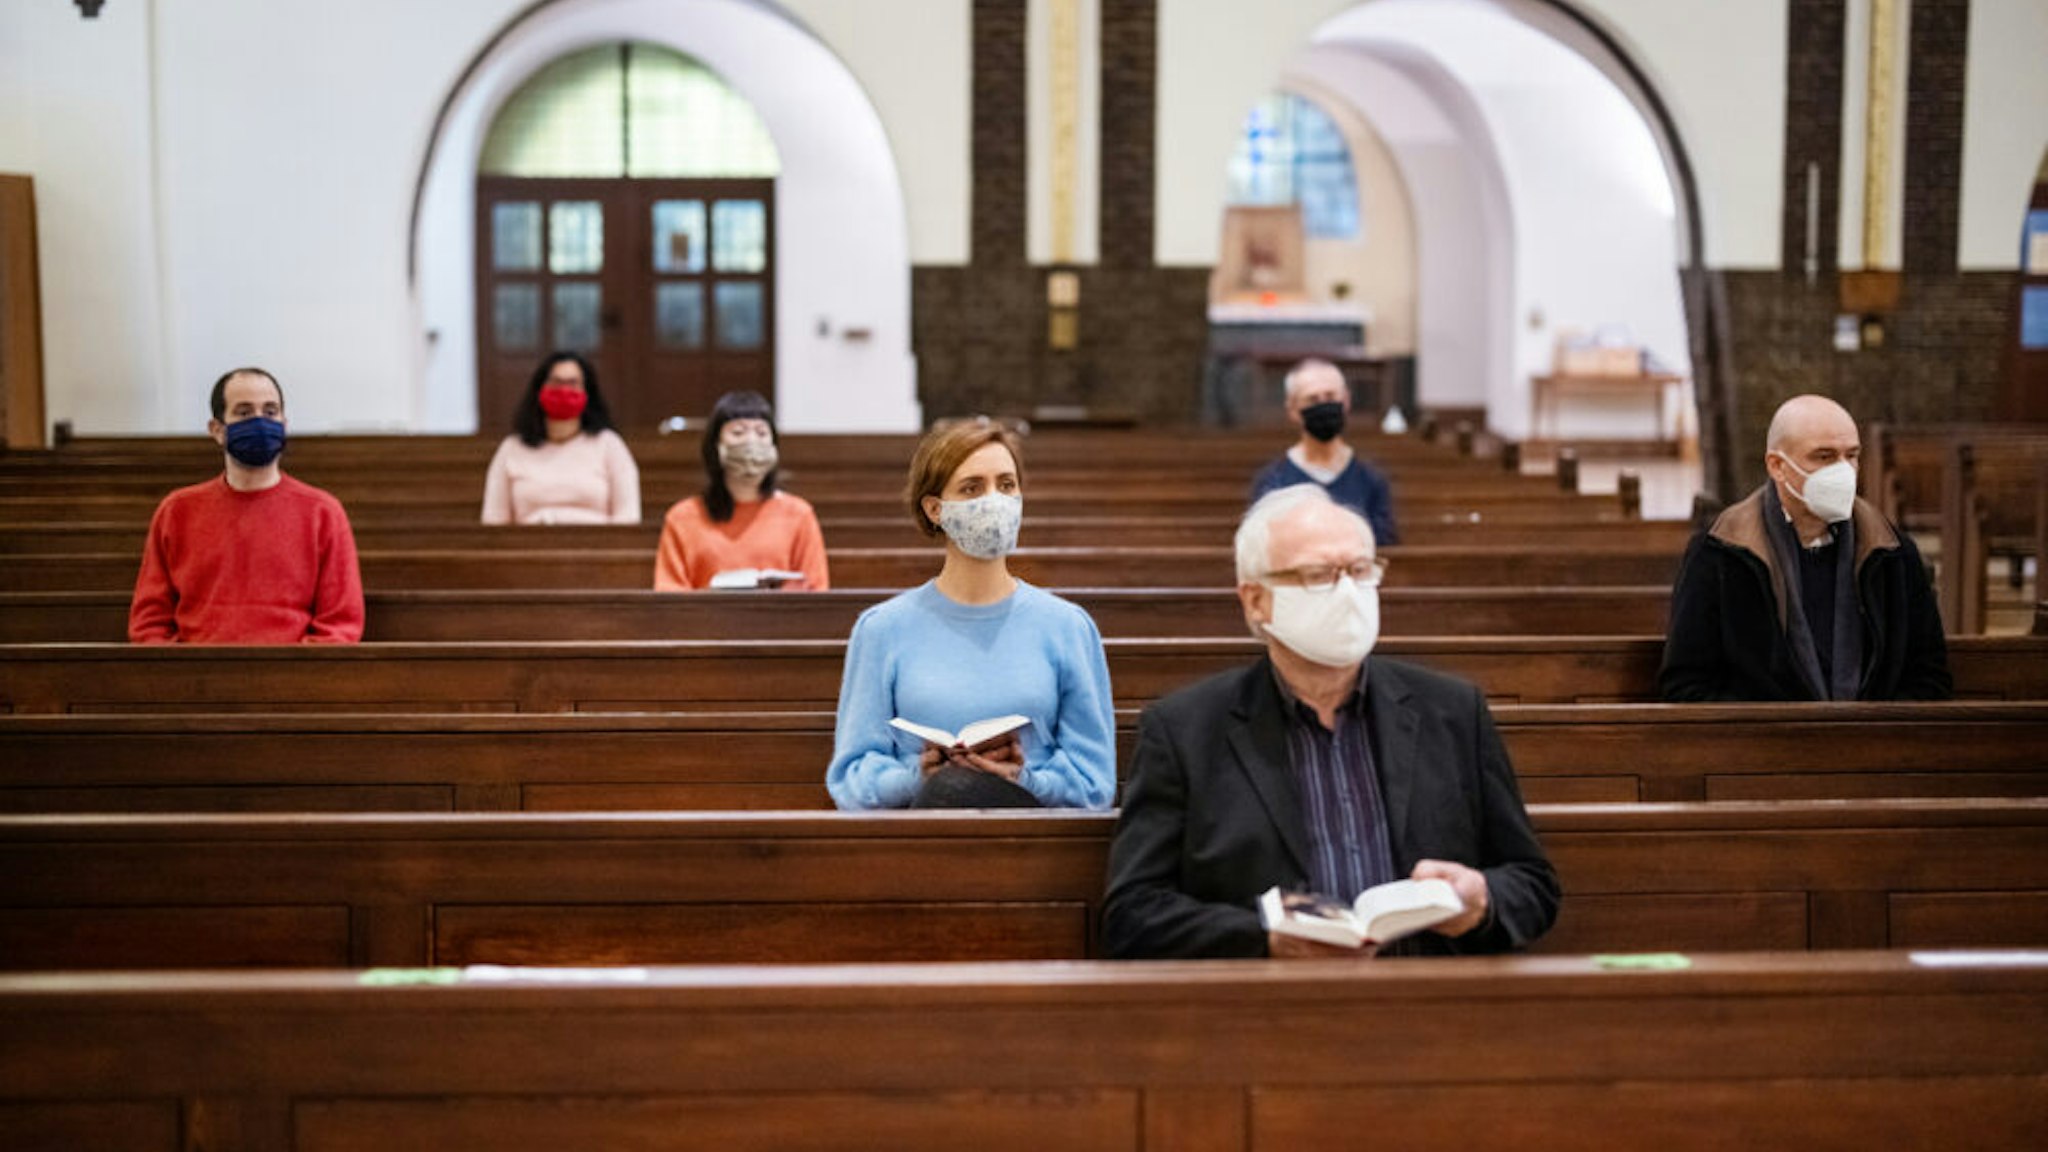 Group of people at church congregation during pandemic